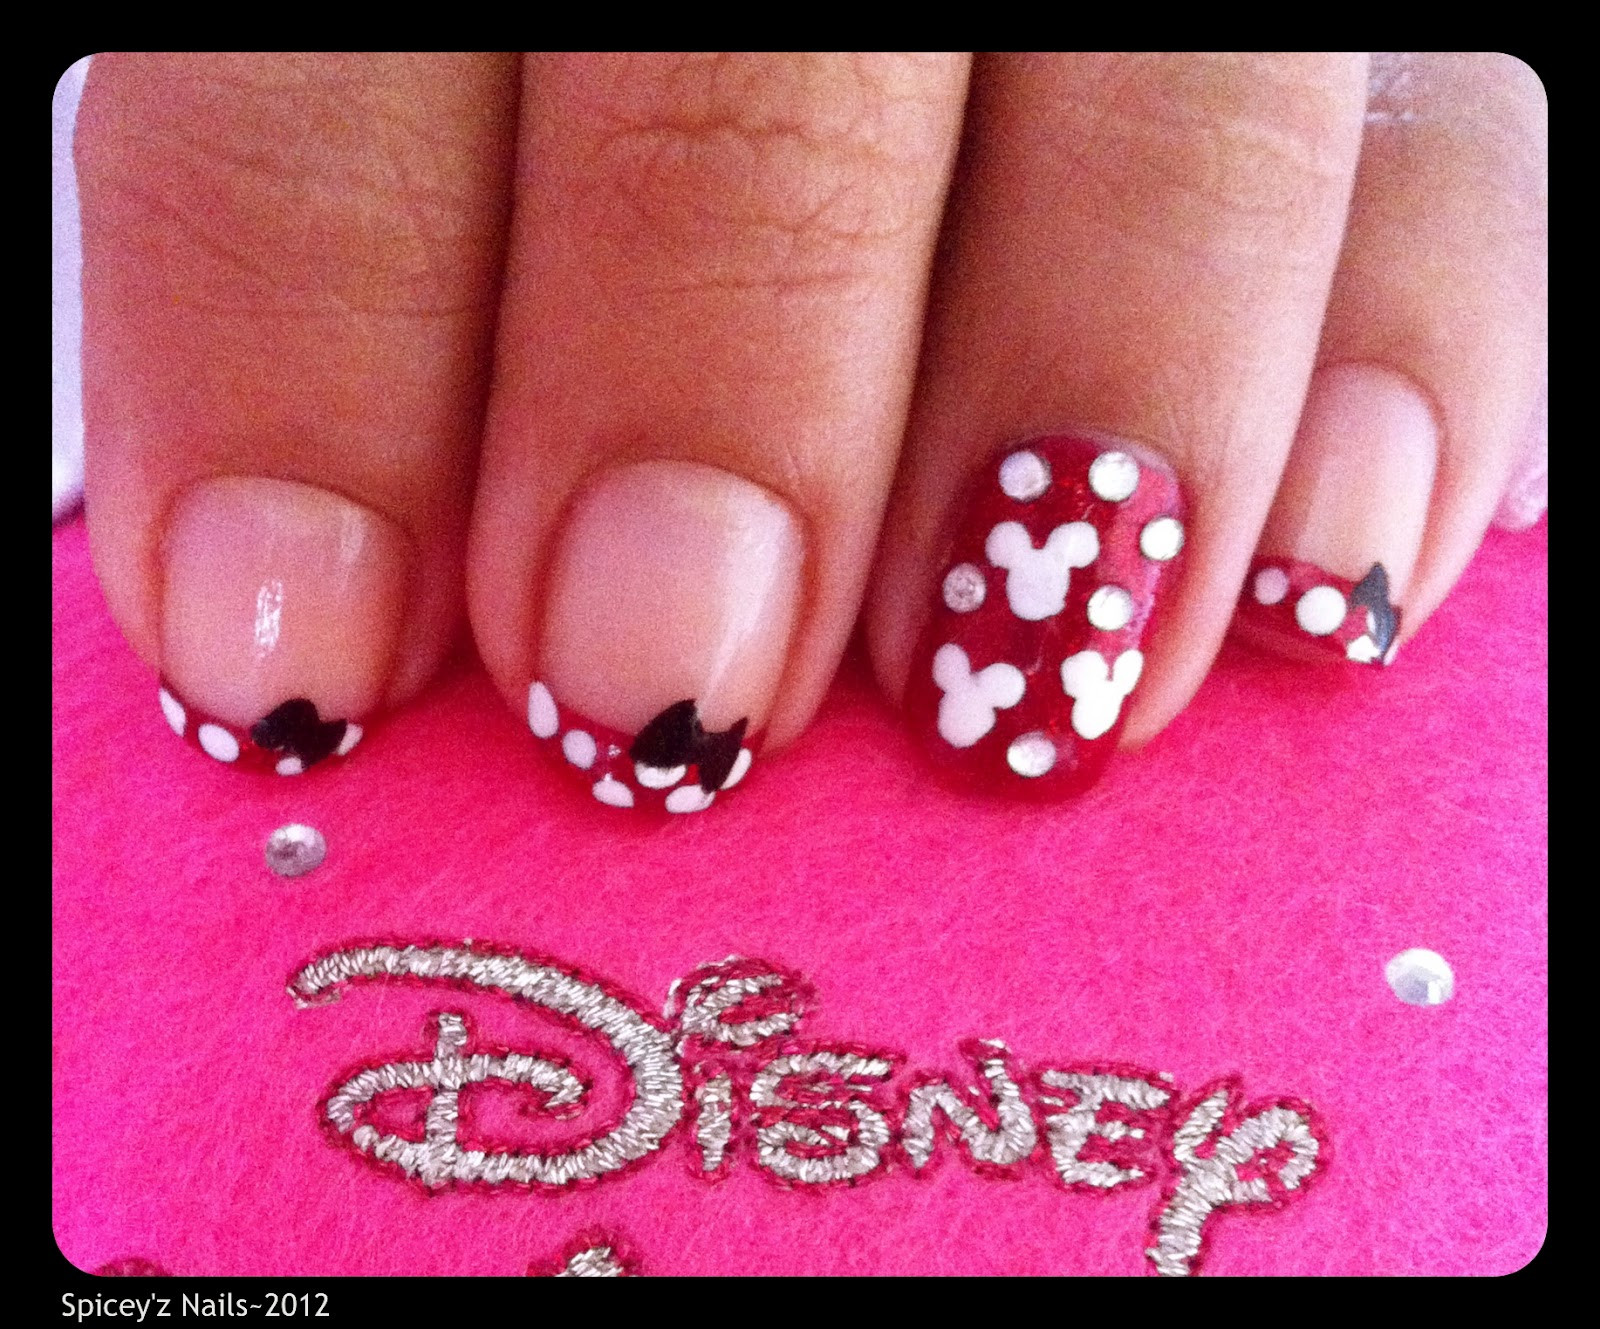 2. Minnie Mouse Nail Design - wide 3